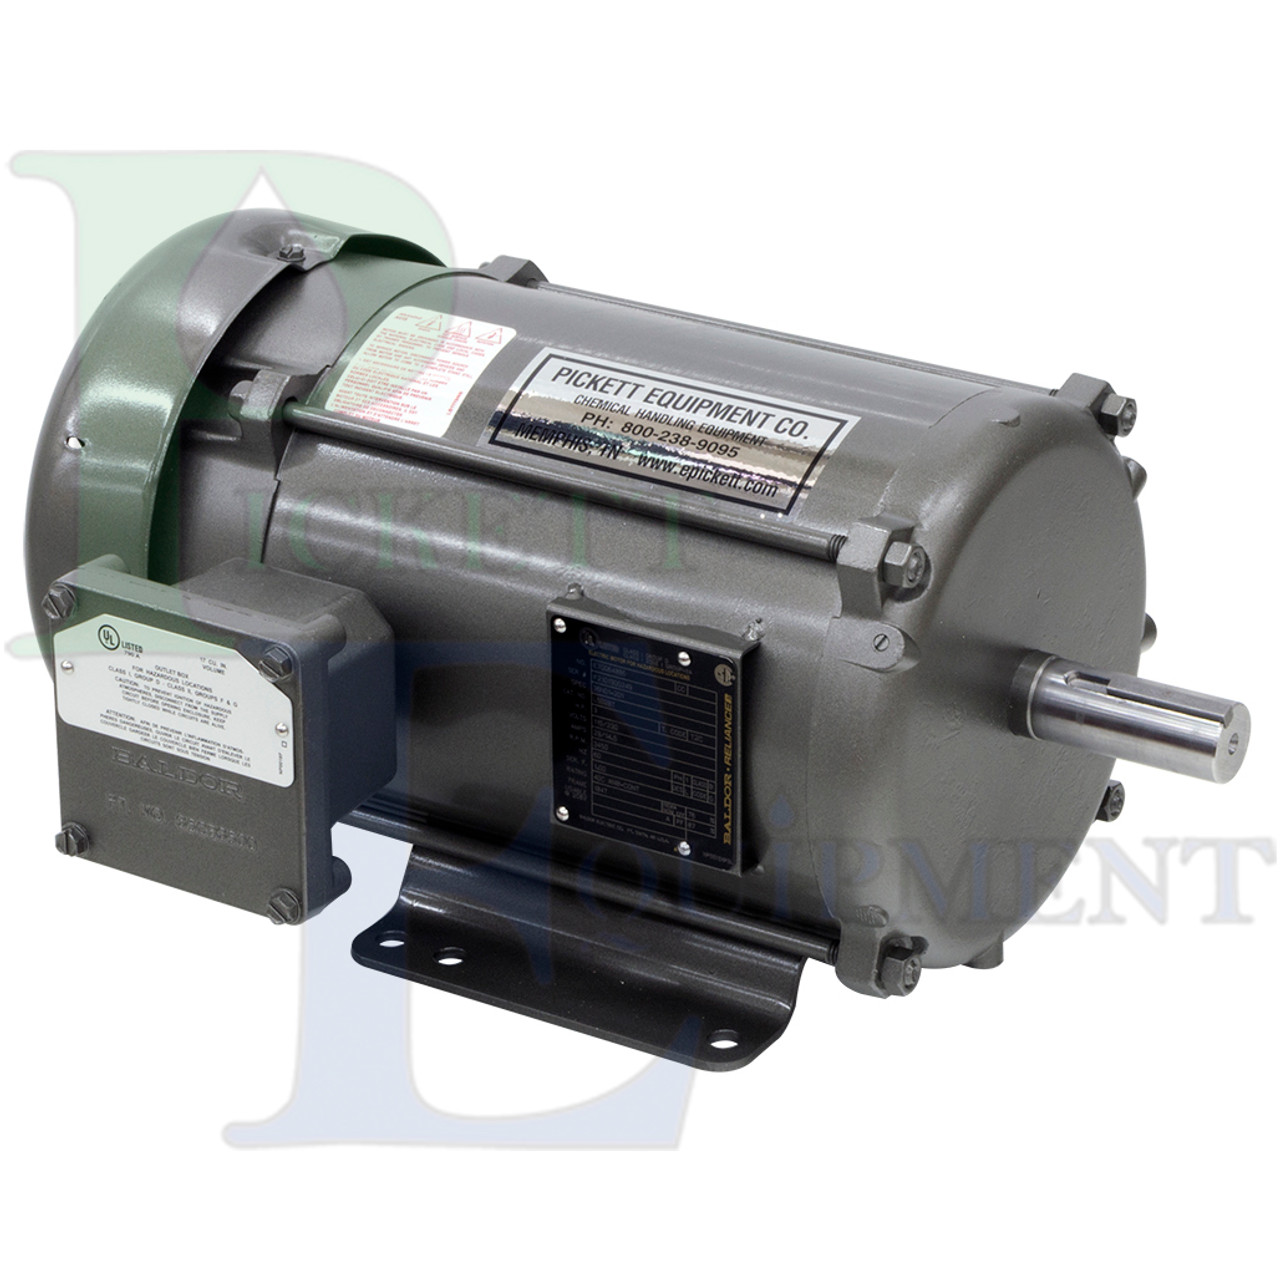 1PH 115/230VAC Baldor Class I, Group D, Division 1 explosion-proof electric motor